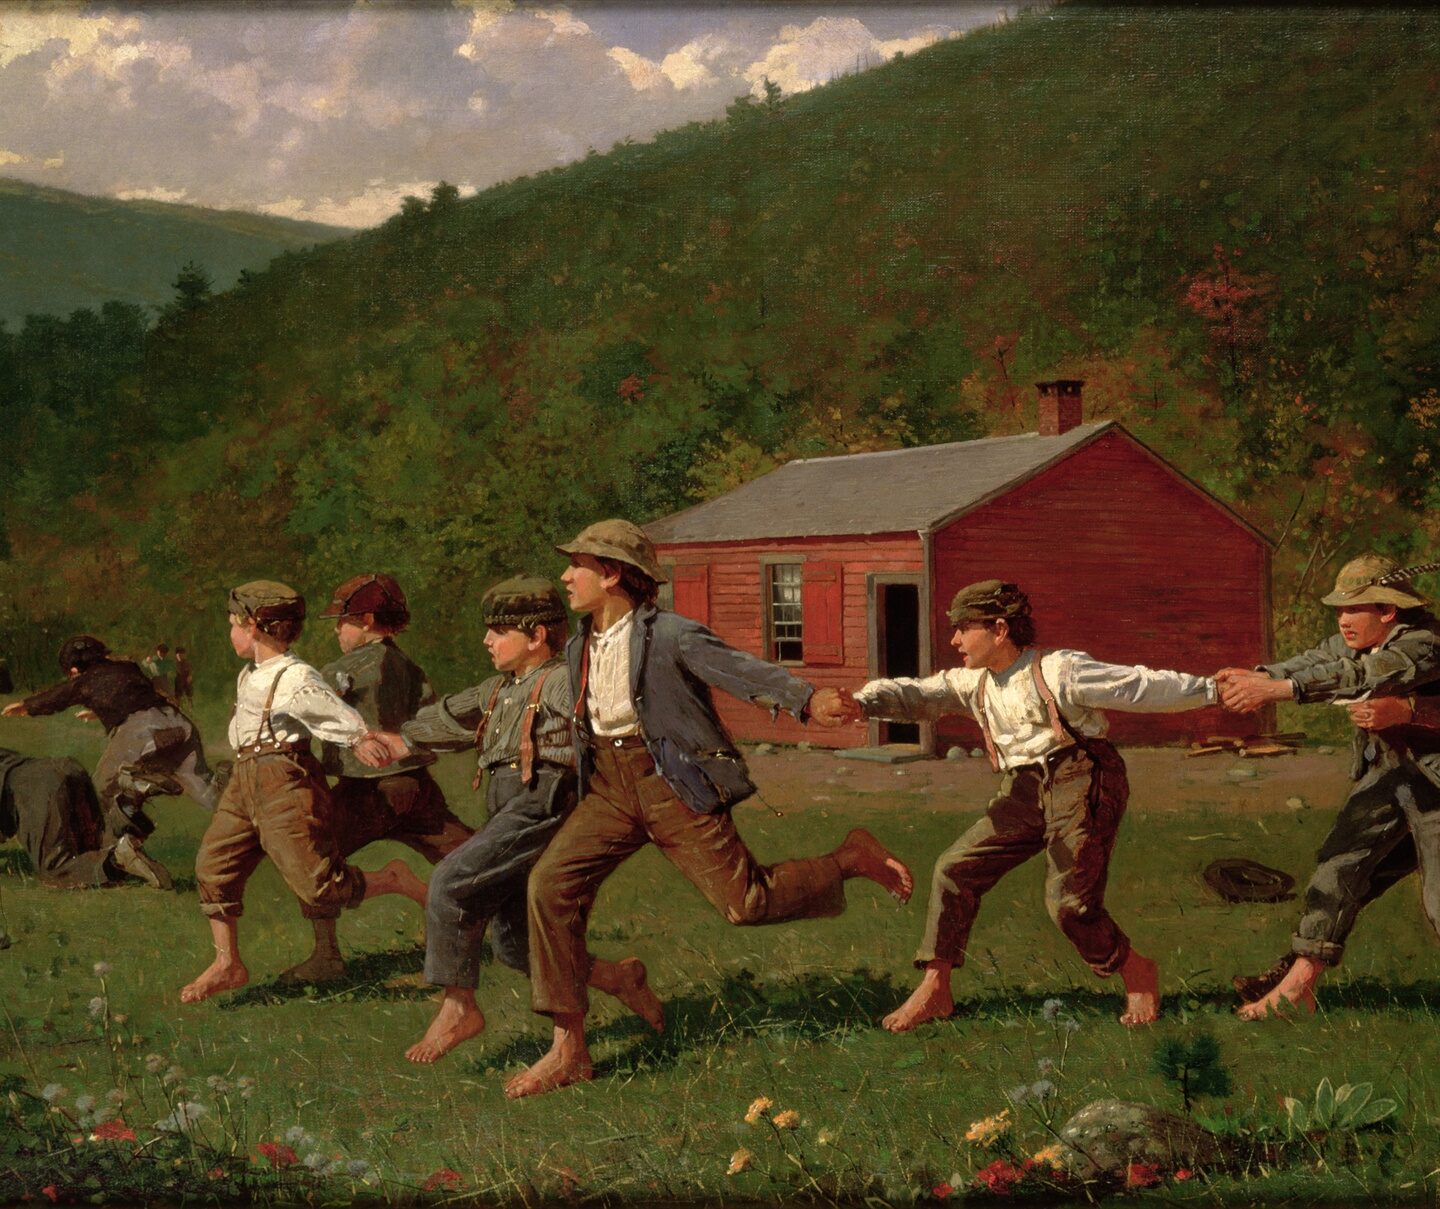 Snap the Whip, Winslow Homer, 1872